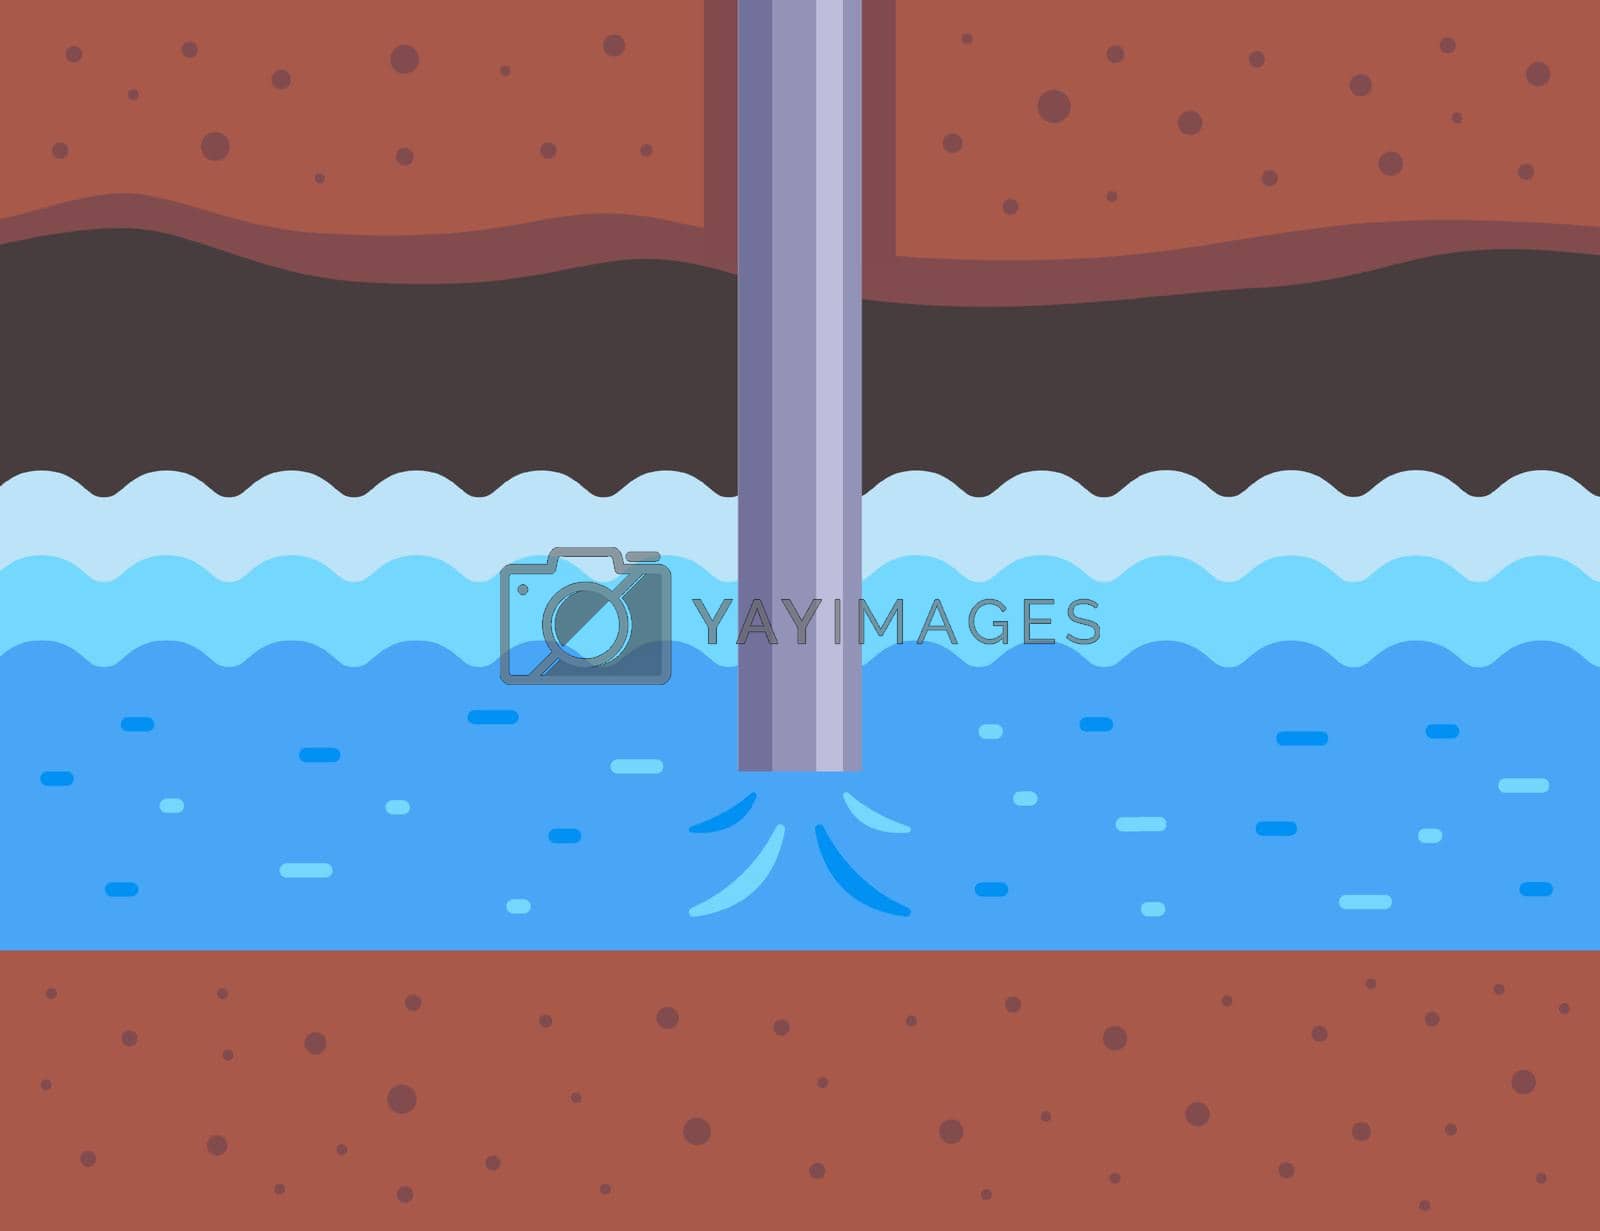 Royalty free image of well for the extraction of clean drinking water from underground. by PlutusART